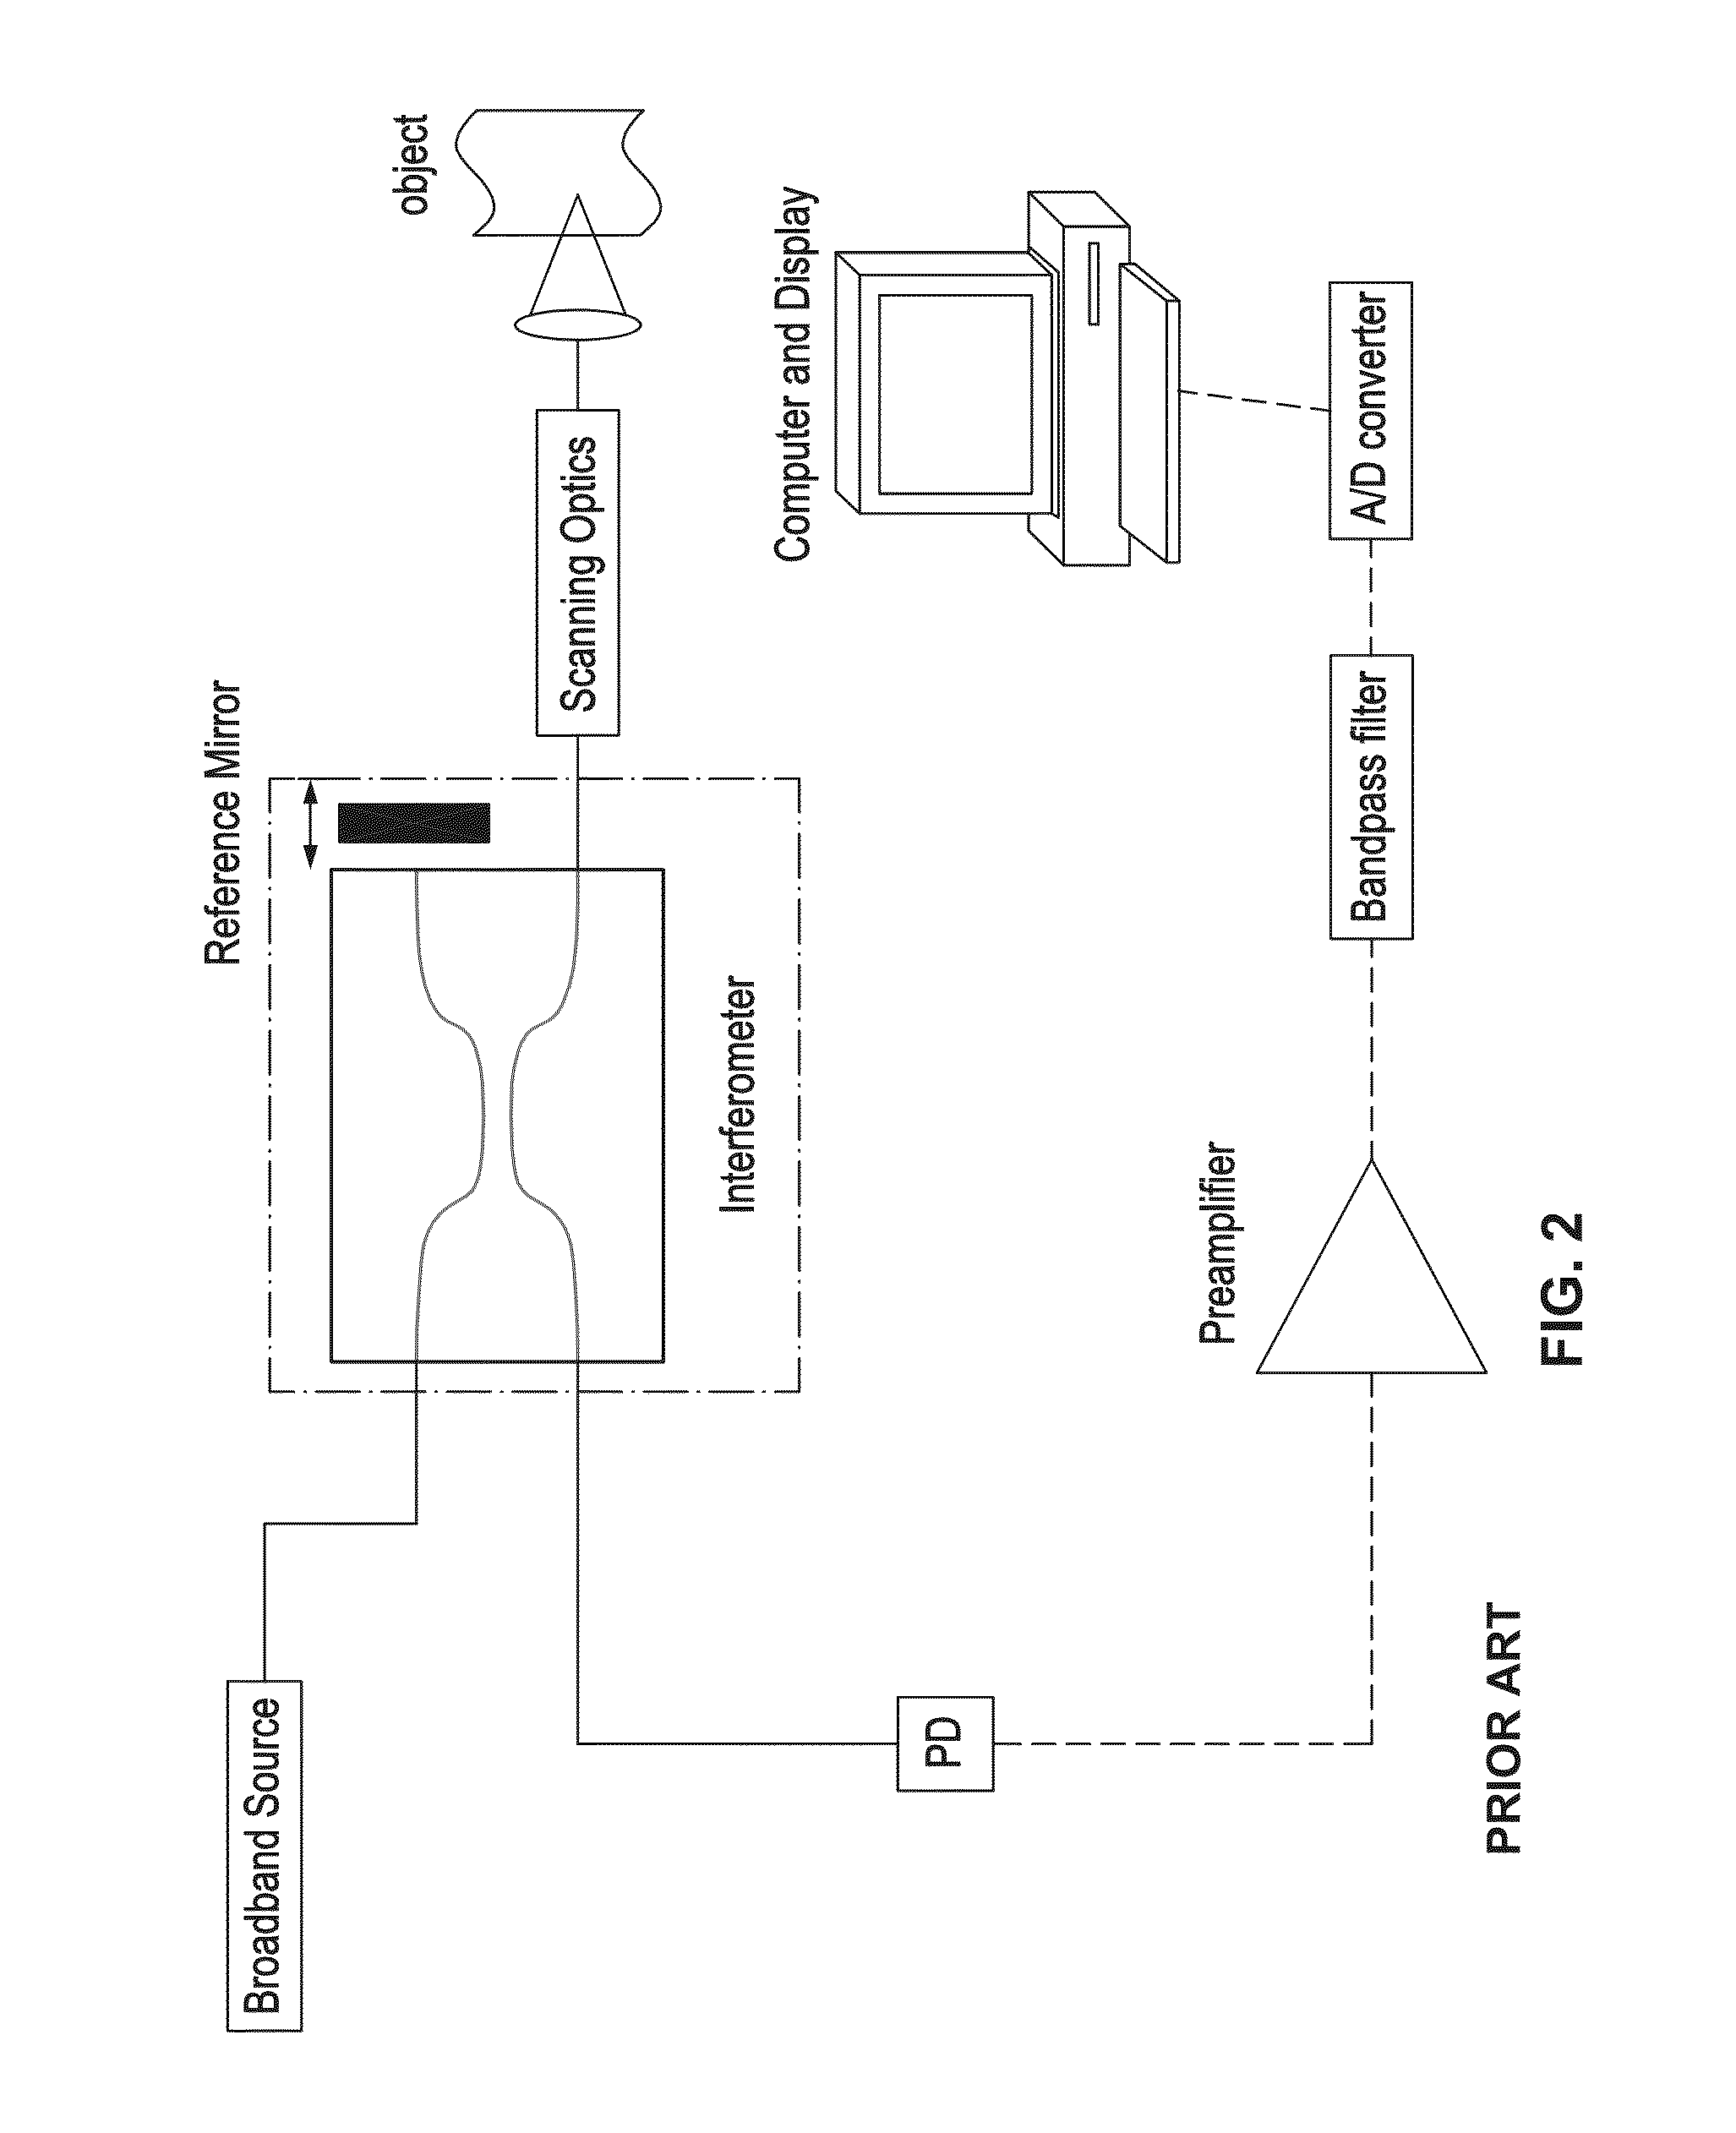 Optical coherence tomography system and method